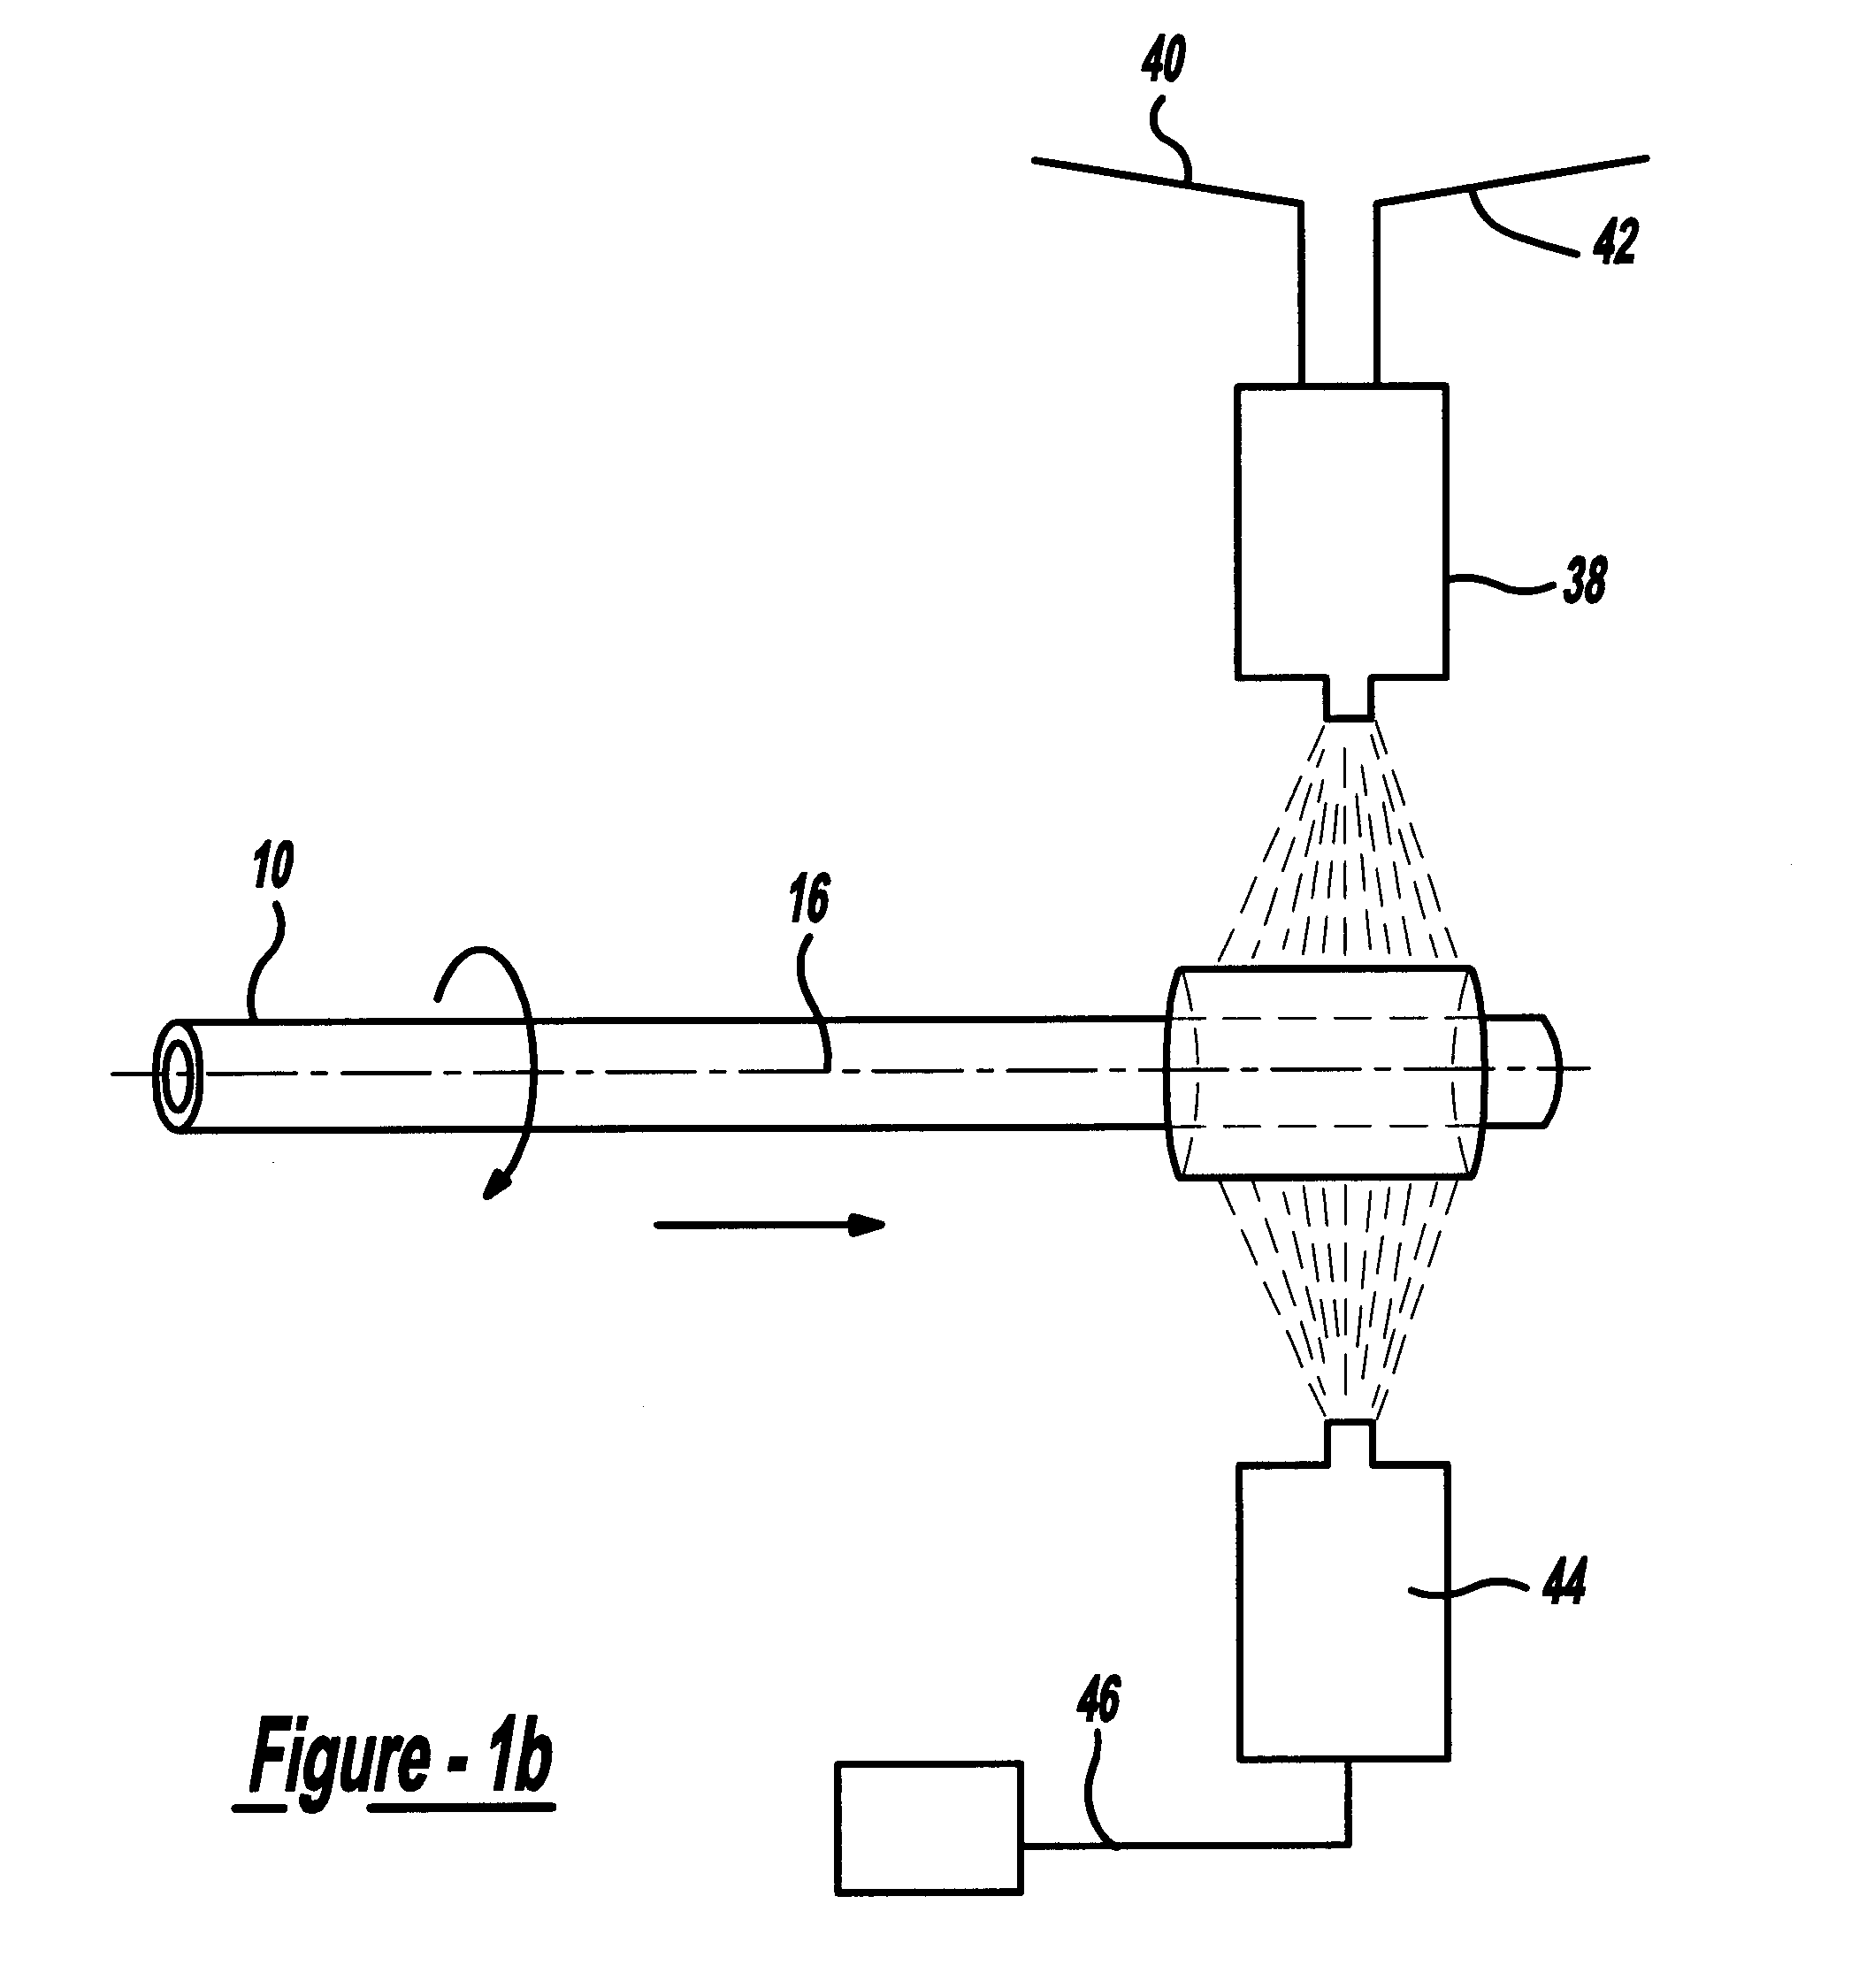 Method of making spray-formed articles using a polymeric mandrel